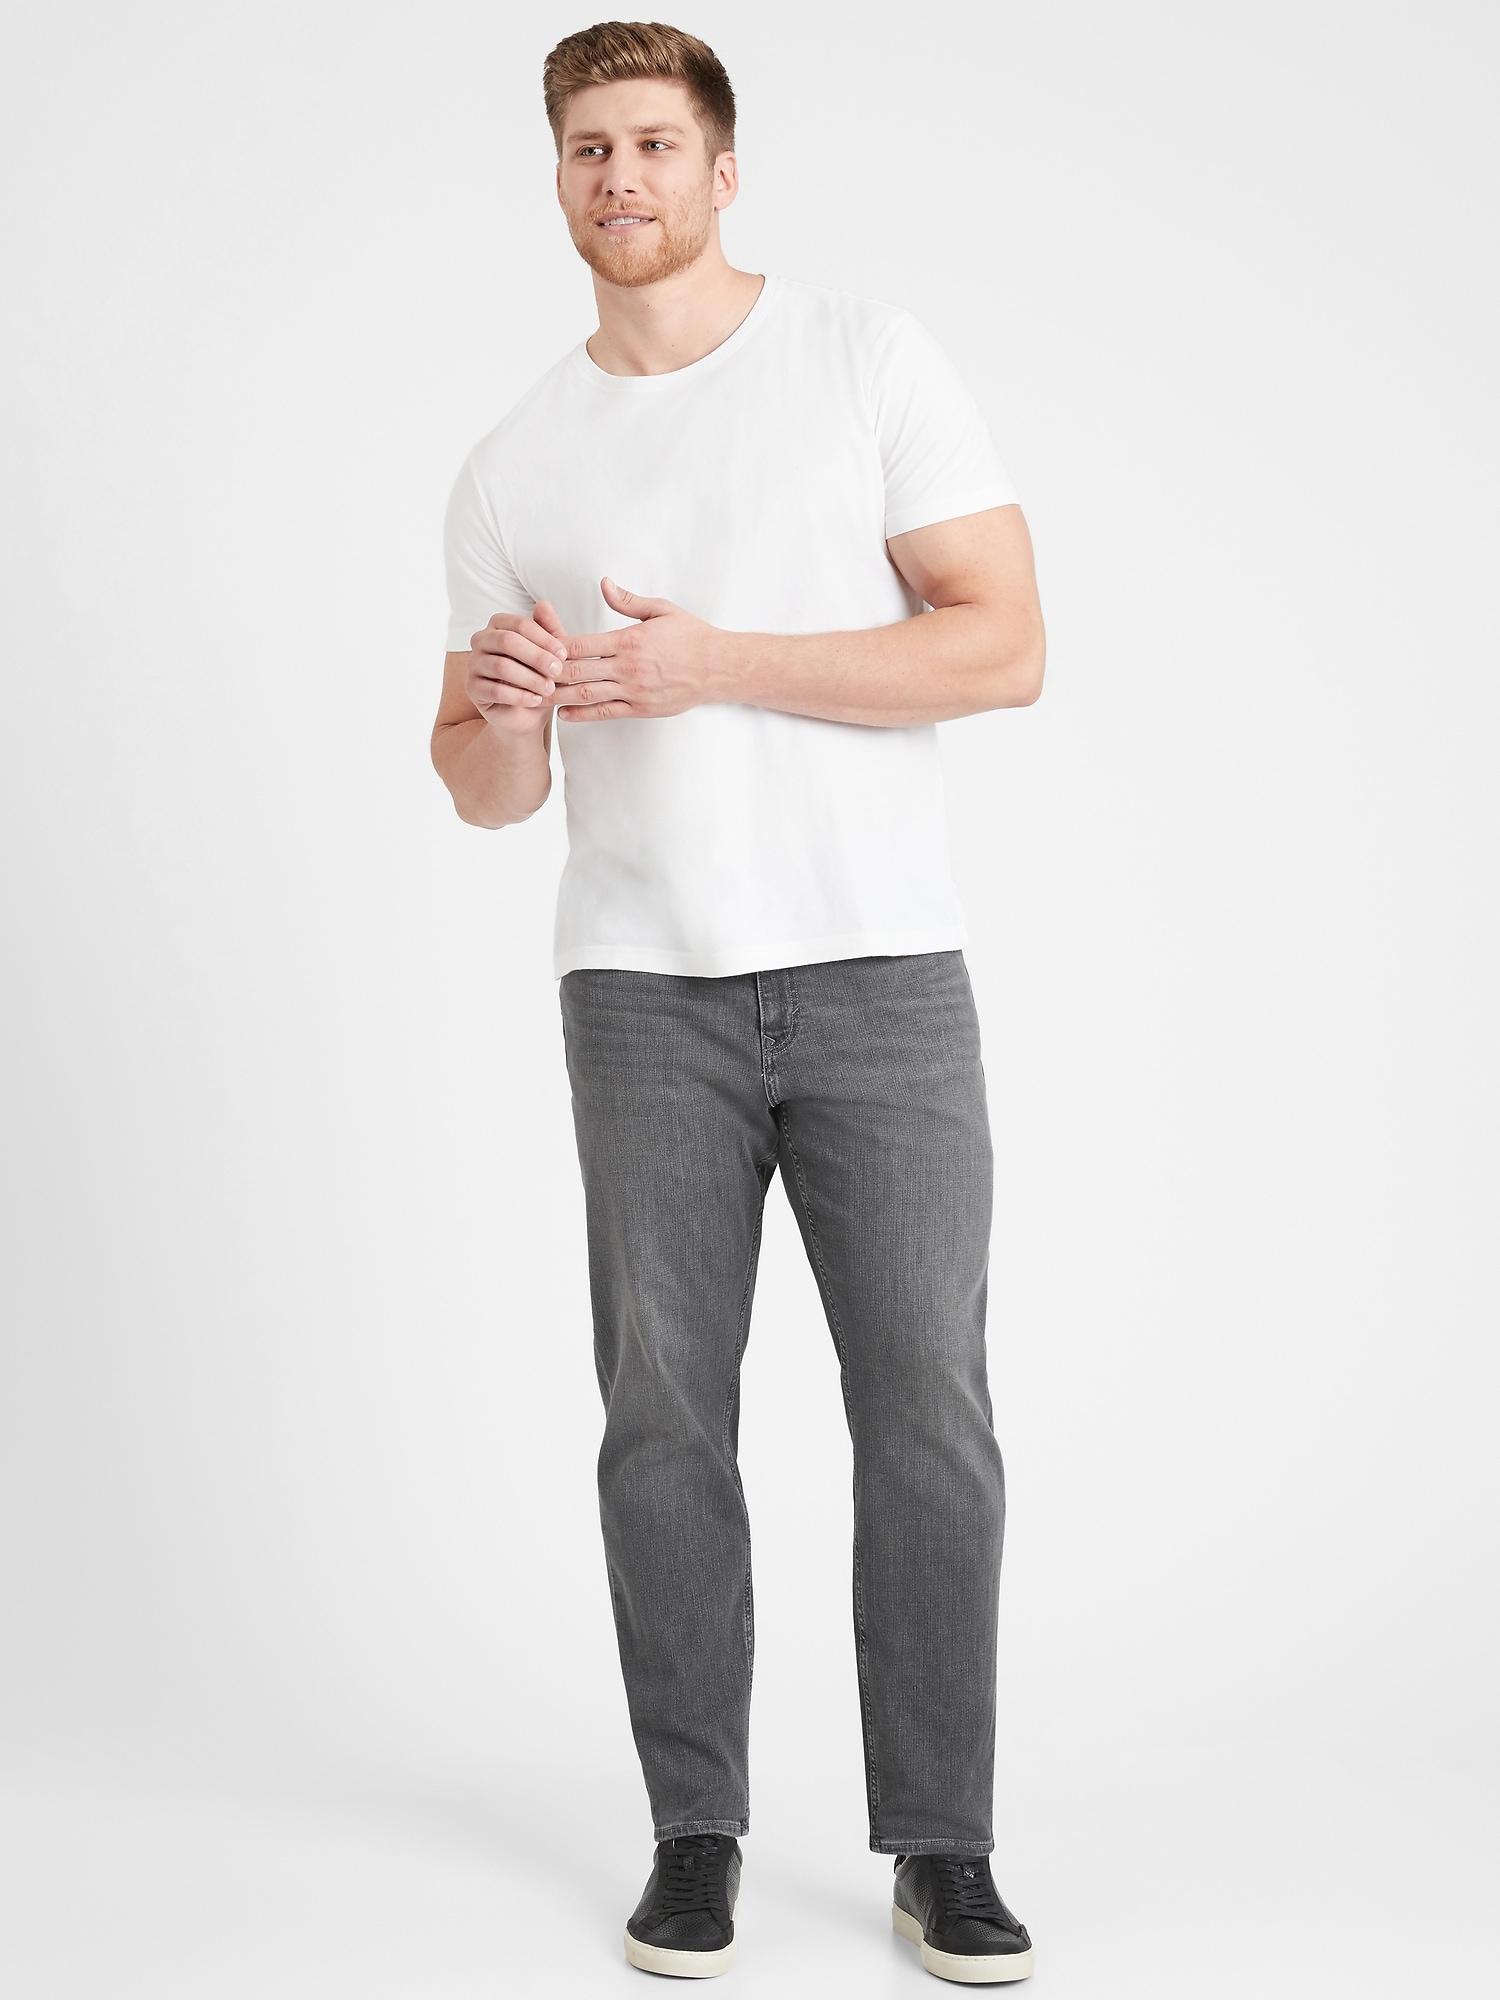 Banana Republic Athletic Tapered Rapid Movement Denim Jean With Coolmax®  Technology in Slate Gray Wash (Gray) for Men - Lyst